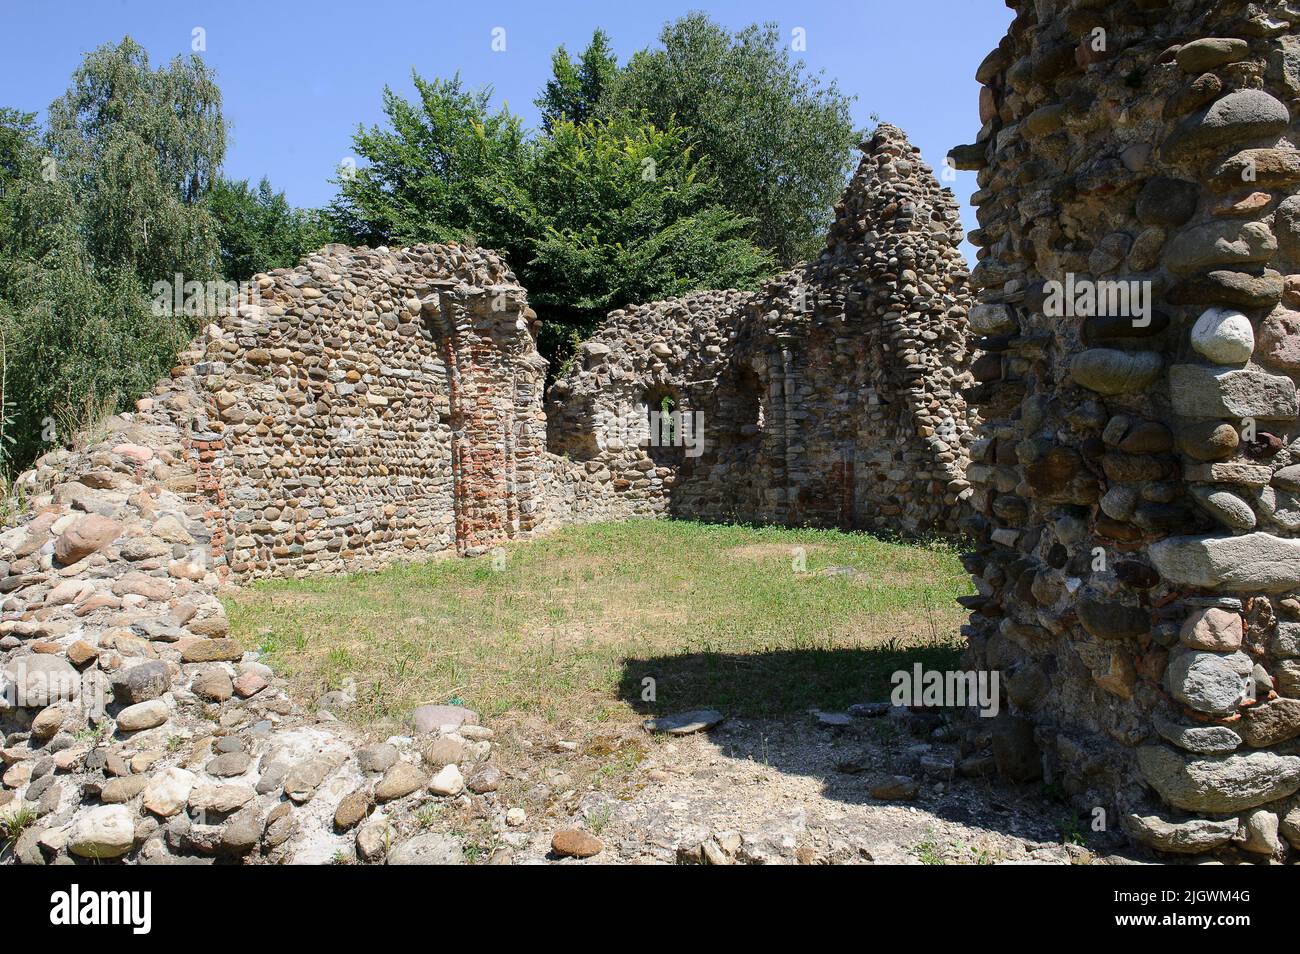 Europe, Italy, Lombardy, Varese countryThe archaeological area of Castelseprio with the ruins of a village destroyed in the 13th century. Unesco - Wor Stock Photo